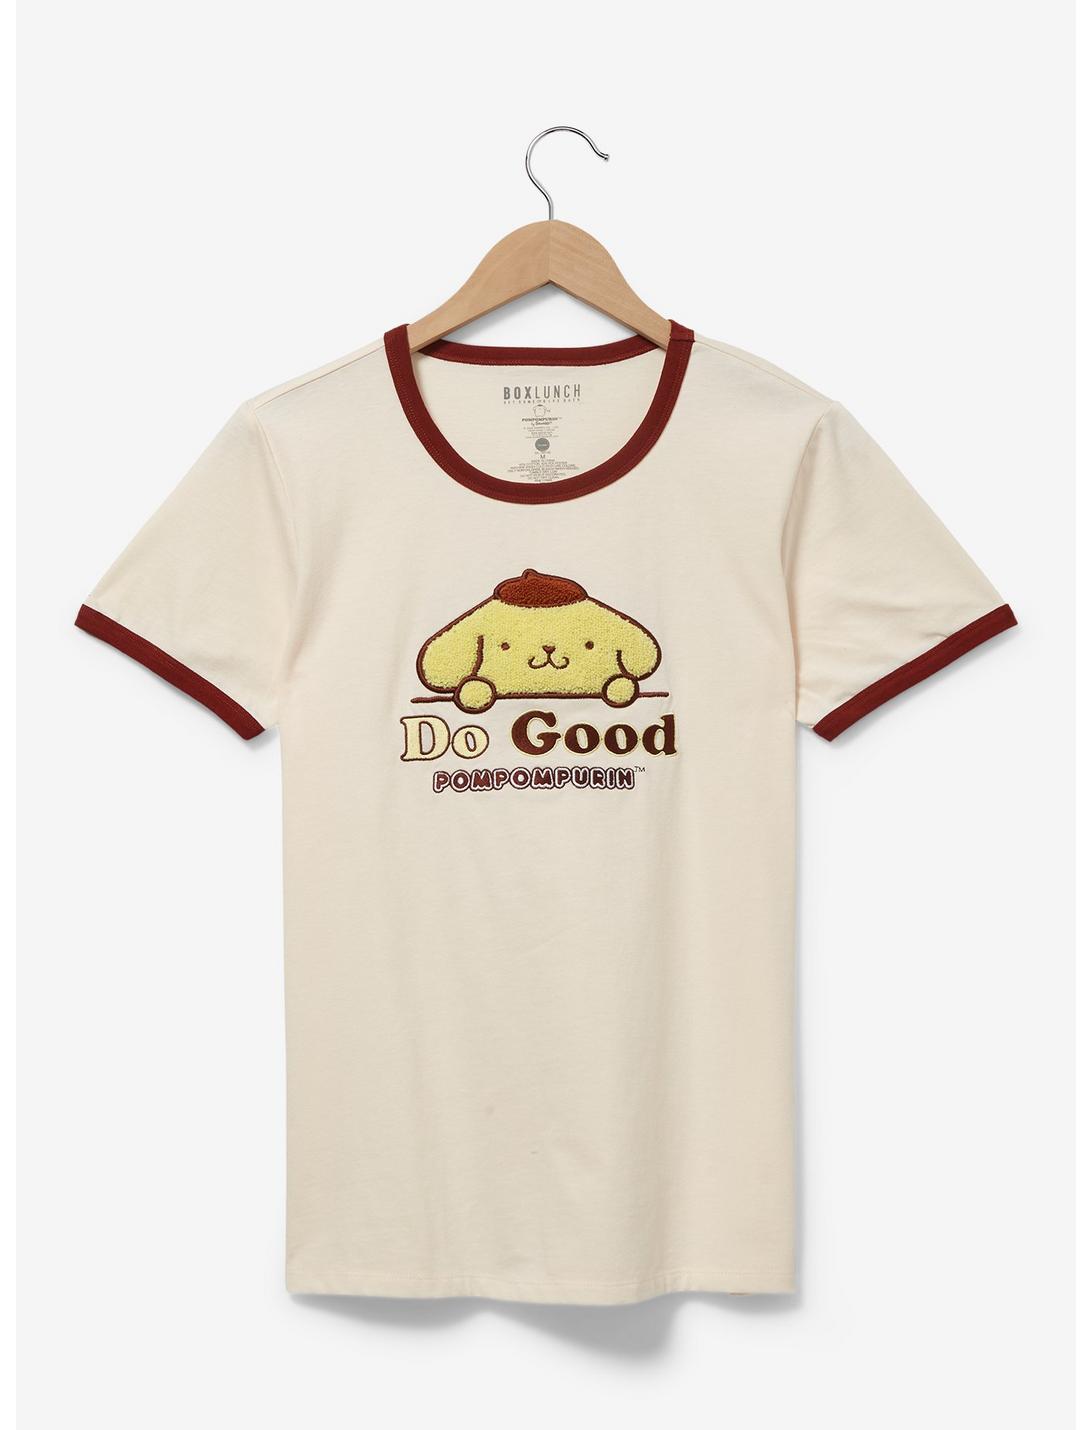 Sanrio Pompompurin Do Good Women's Ringer T-Shirt - BoxLunch Exclusive, OFF WHITE, hi-res